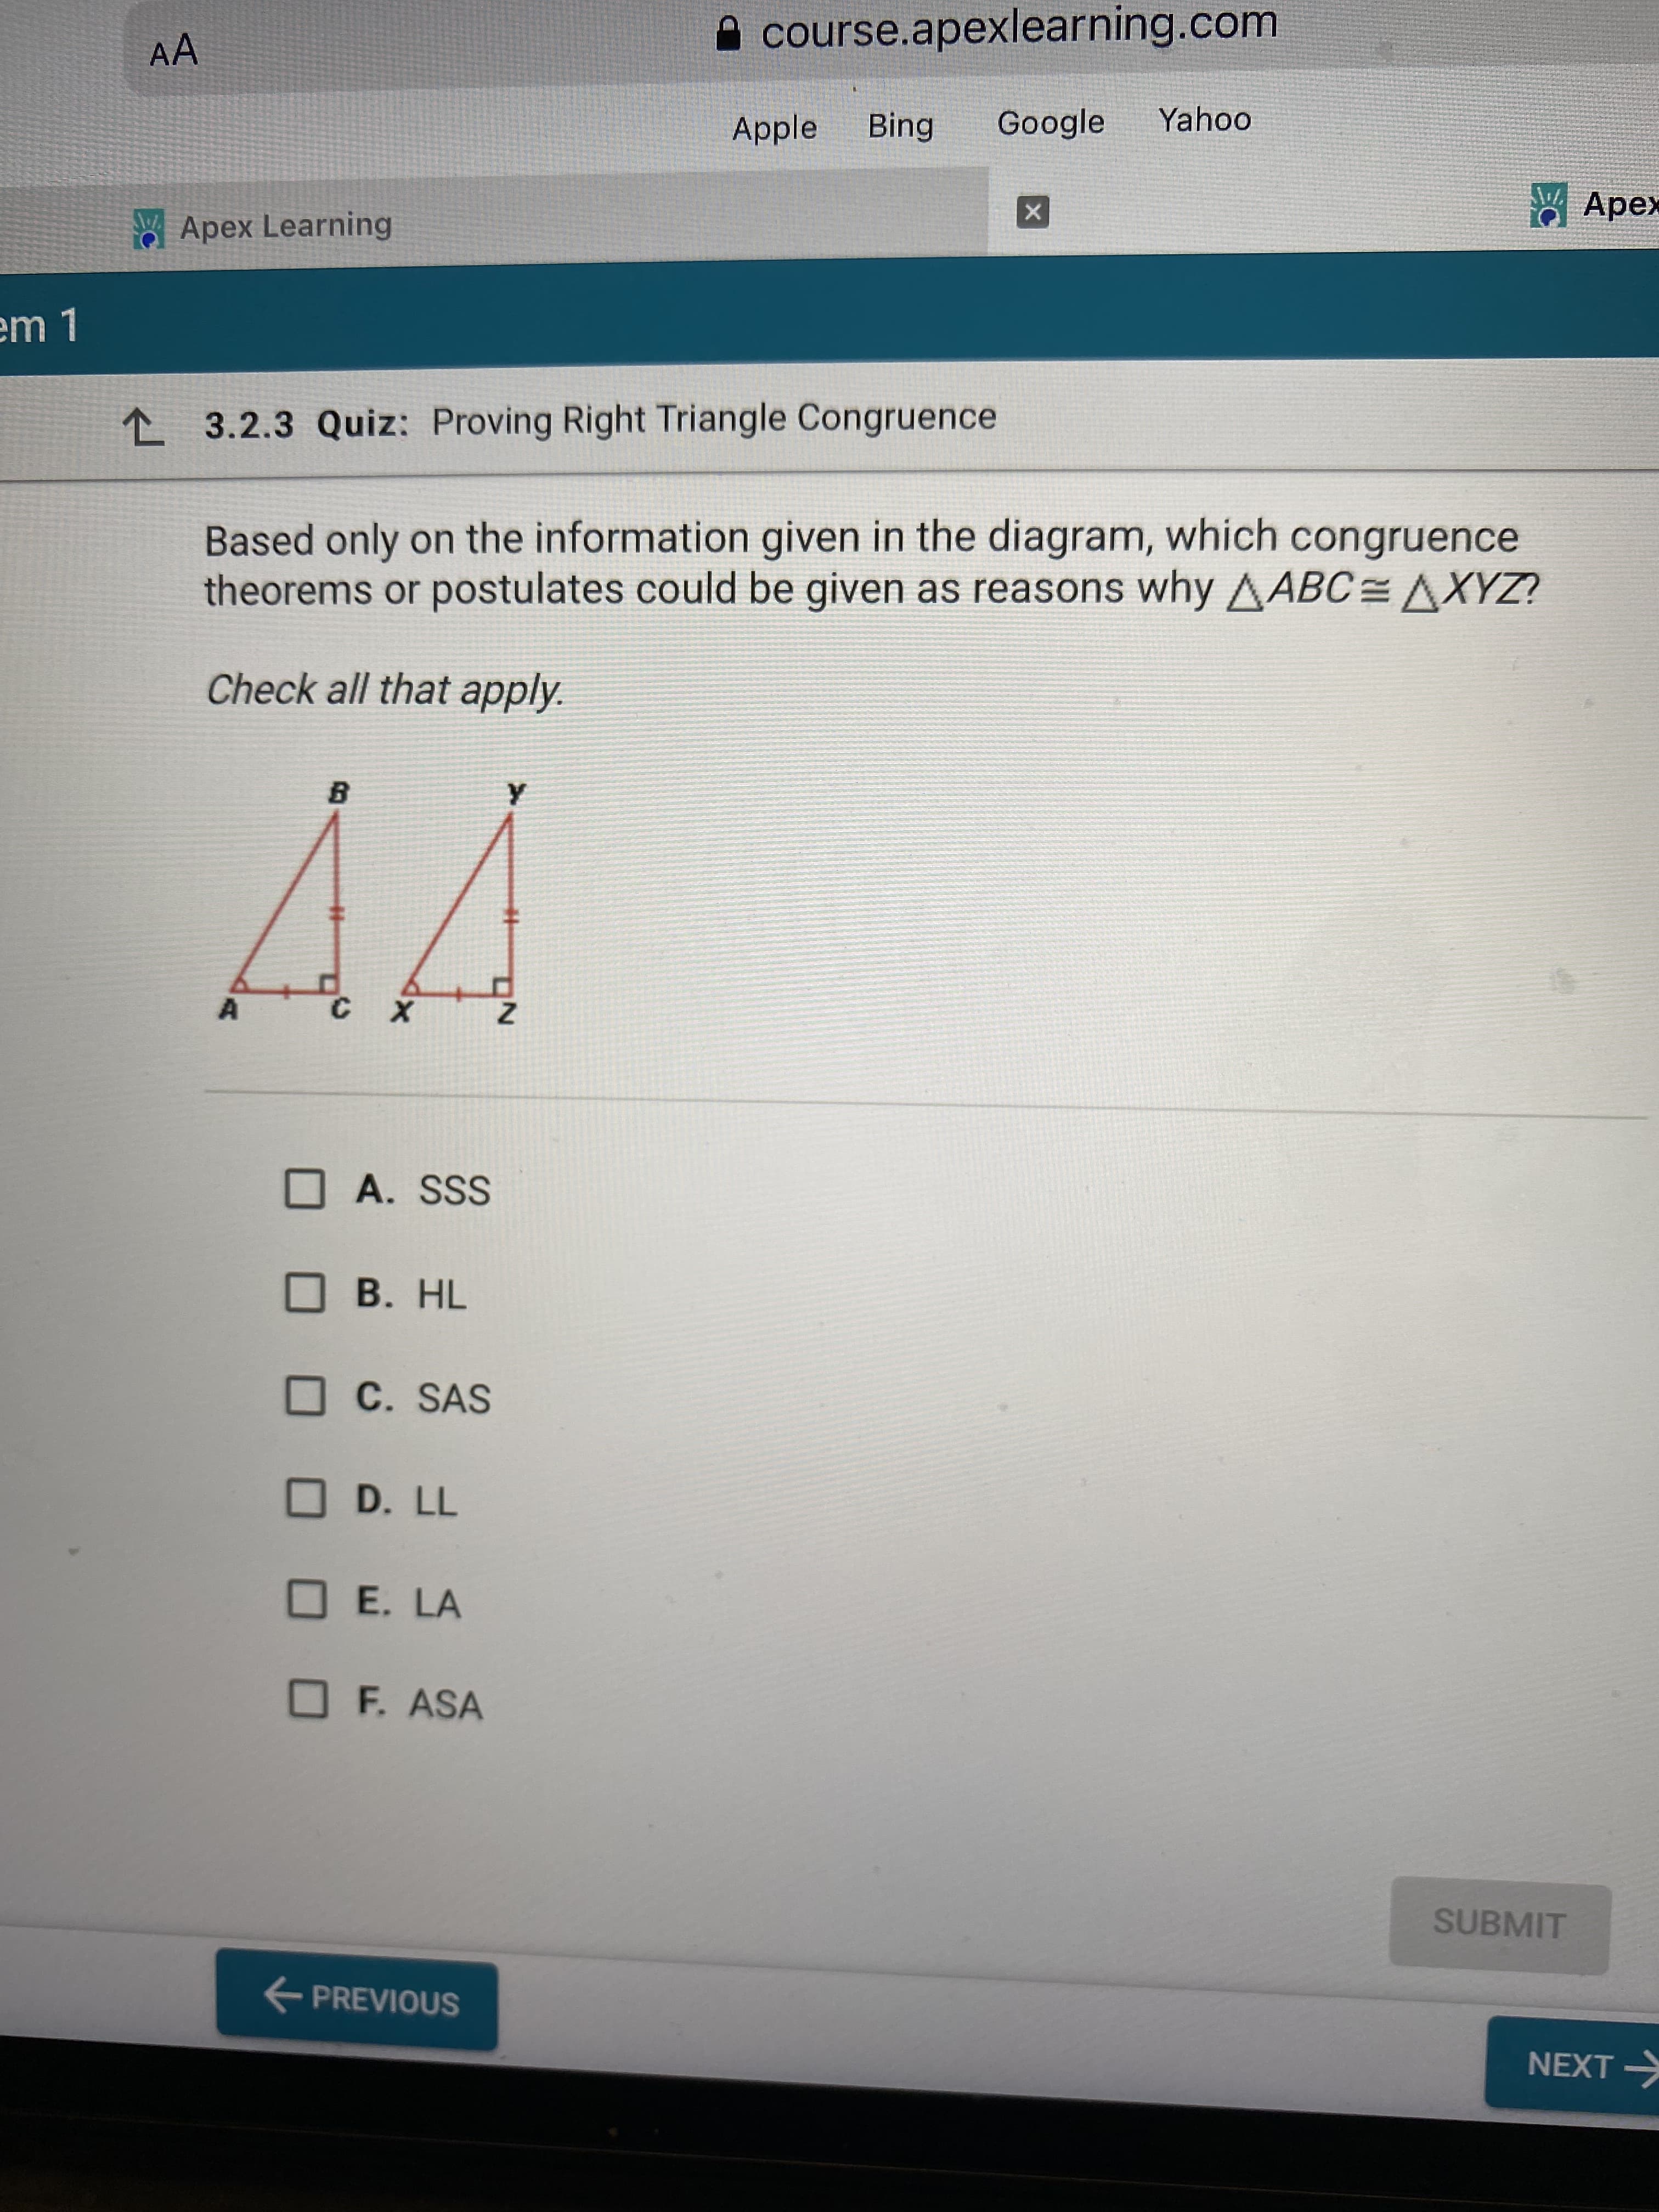 %23
A course.apexlearning.com
AA
Apple
Bing
Google
Yahoo
* Apex
WApex Learning
L 3.2.3 Quiz: Proving Right Triangle Congruence
Based only on the information given in the diagram, which congruence
theorems or postulates could be given as reasons why AABC=AXYZ?
Check all that apply.
O A. SSS
B. HL
OC. SAS
O D. LL
OE. LA
F. ASA
SUBMIT
E PREVIOUS
NEXT >
